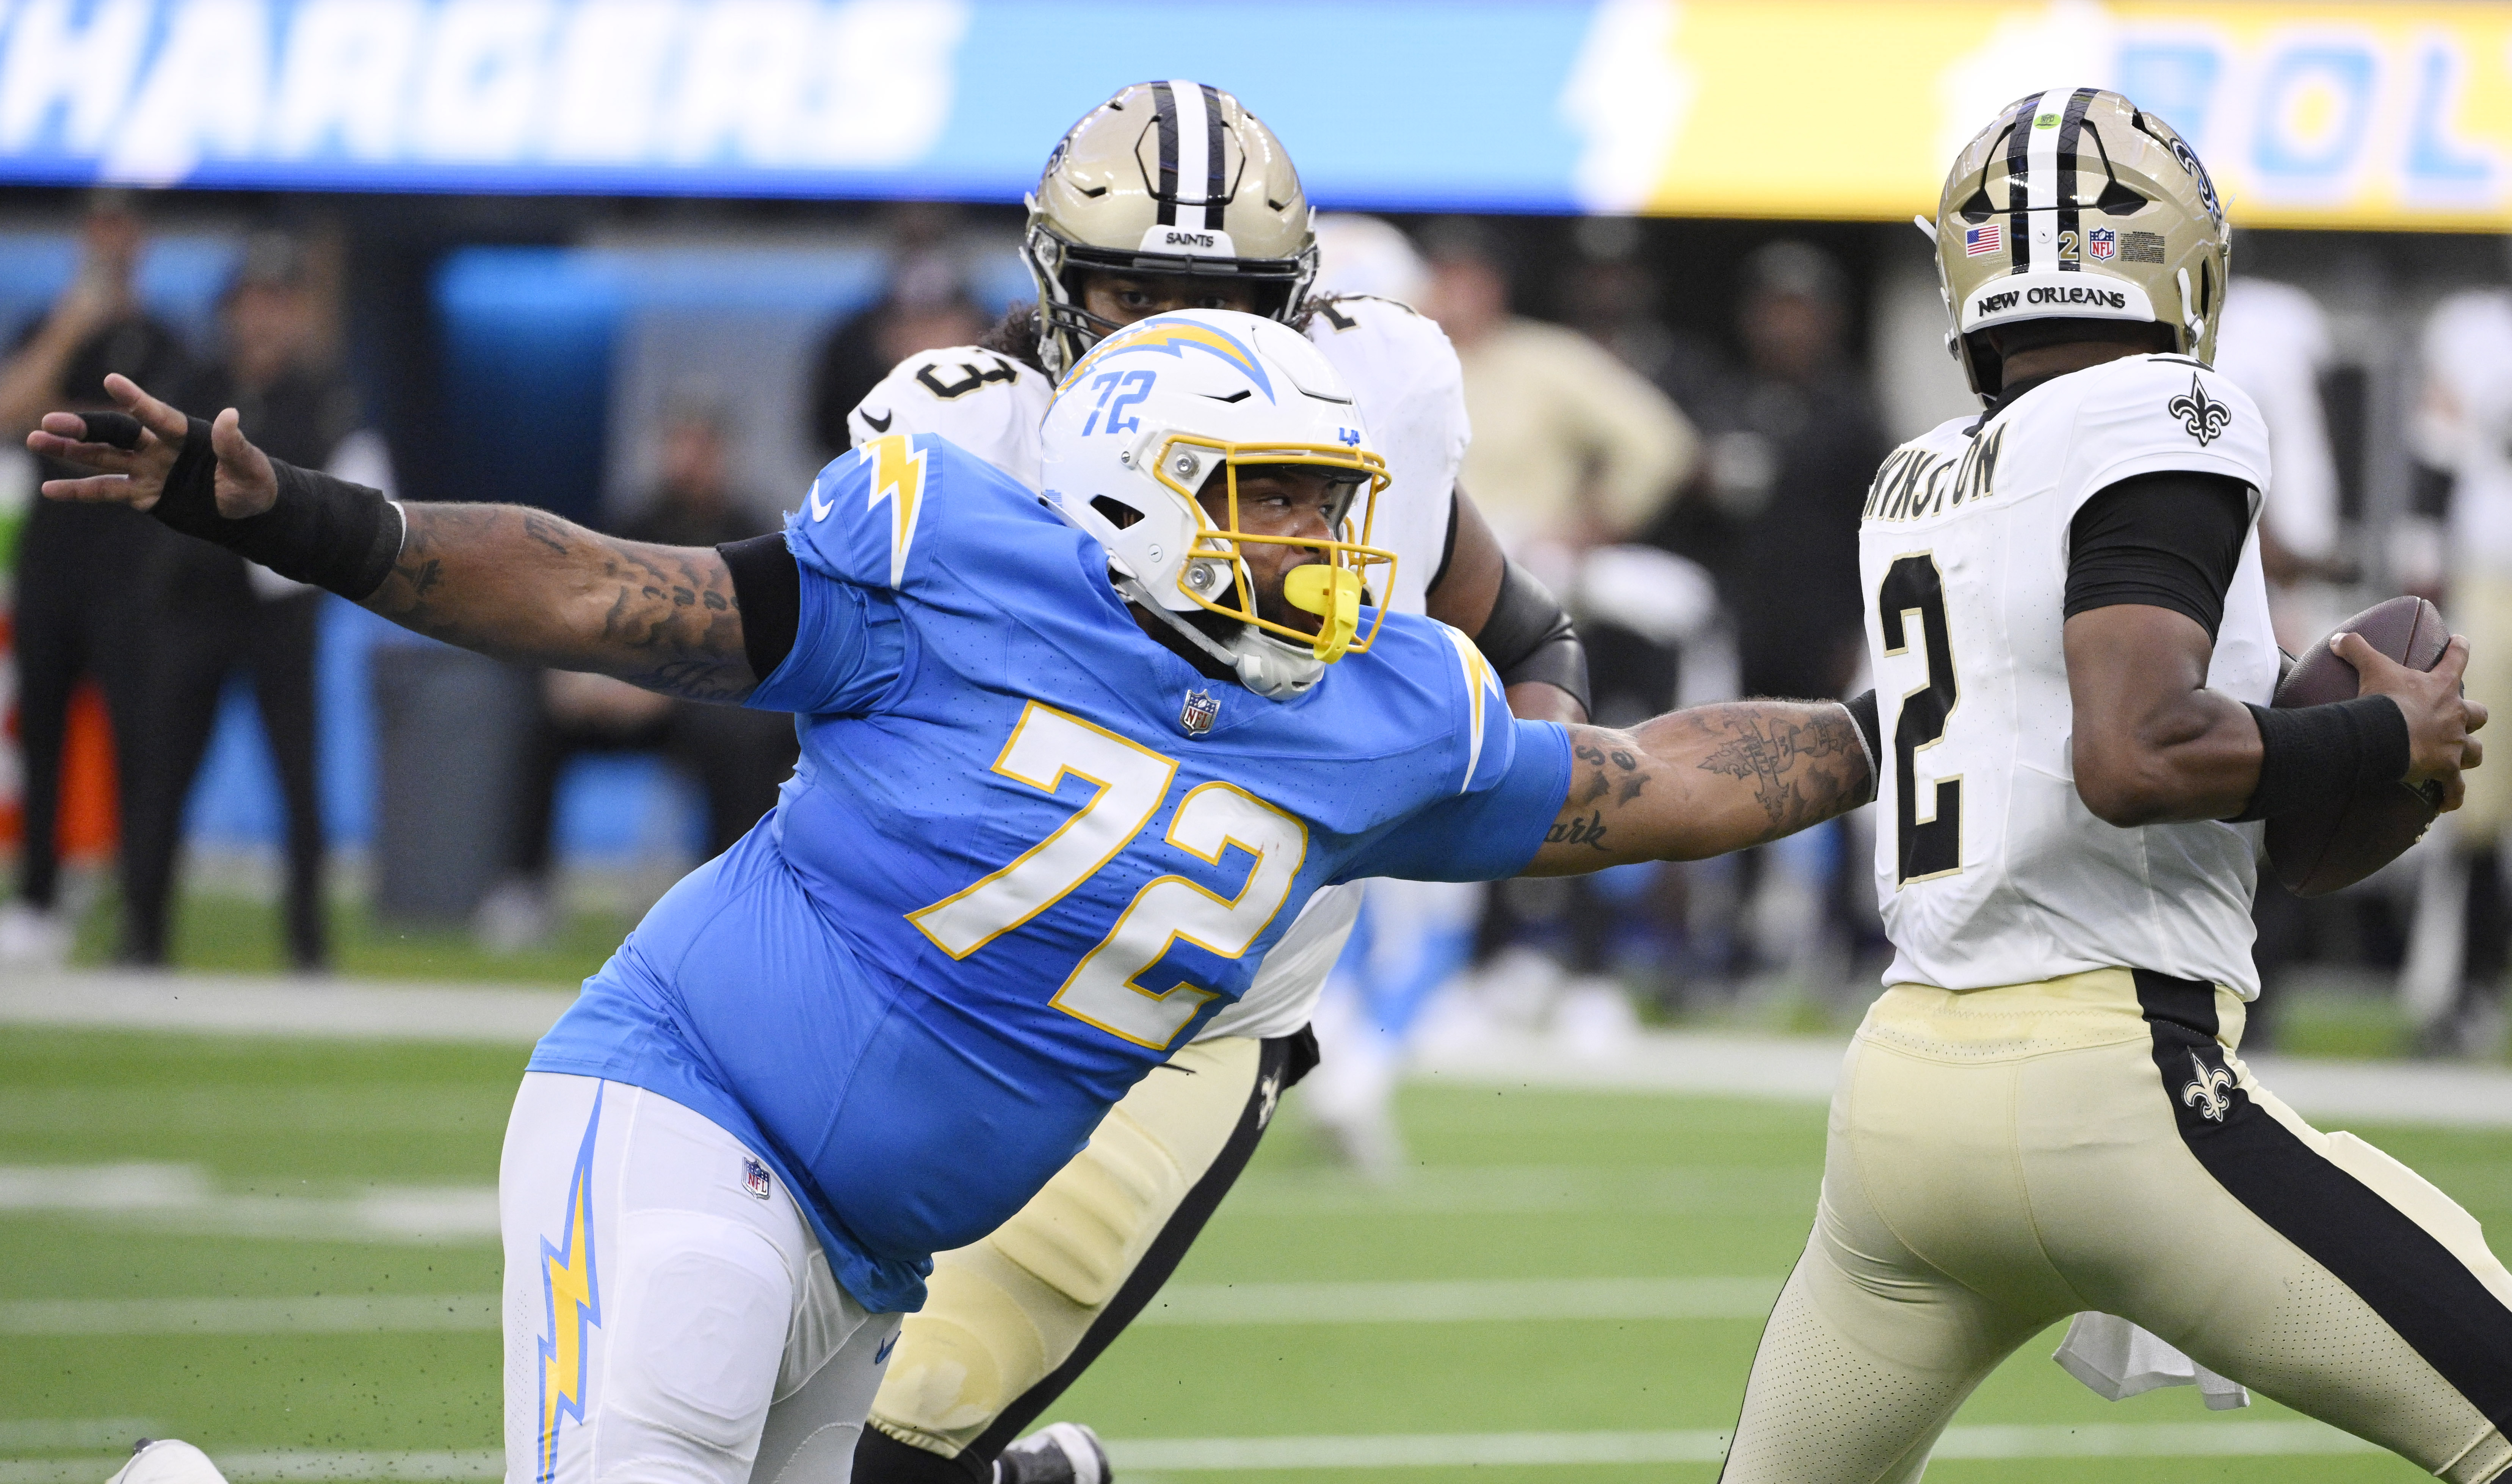 New Orleans Saints defeated the Los Angeles Chargers 22-17 during a pre-season NFL football game.